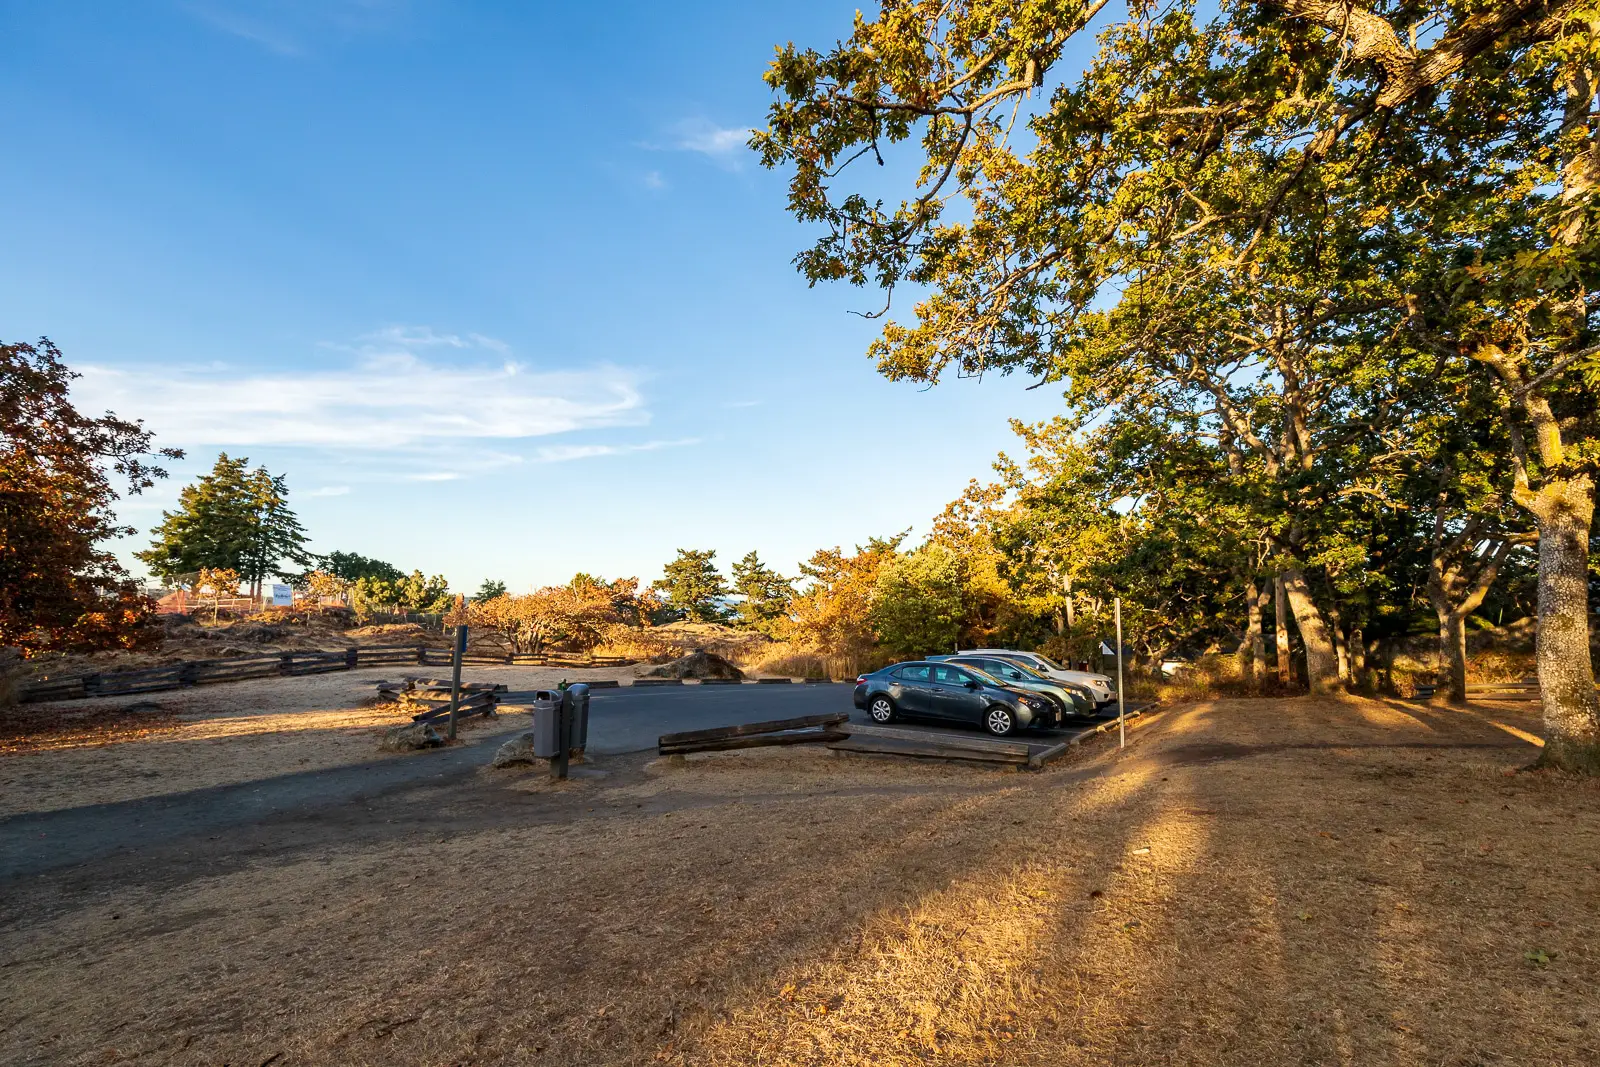 The parking lot at Gonzales Hill Regional Park